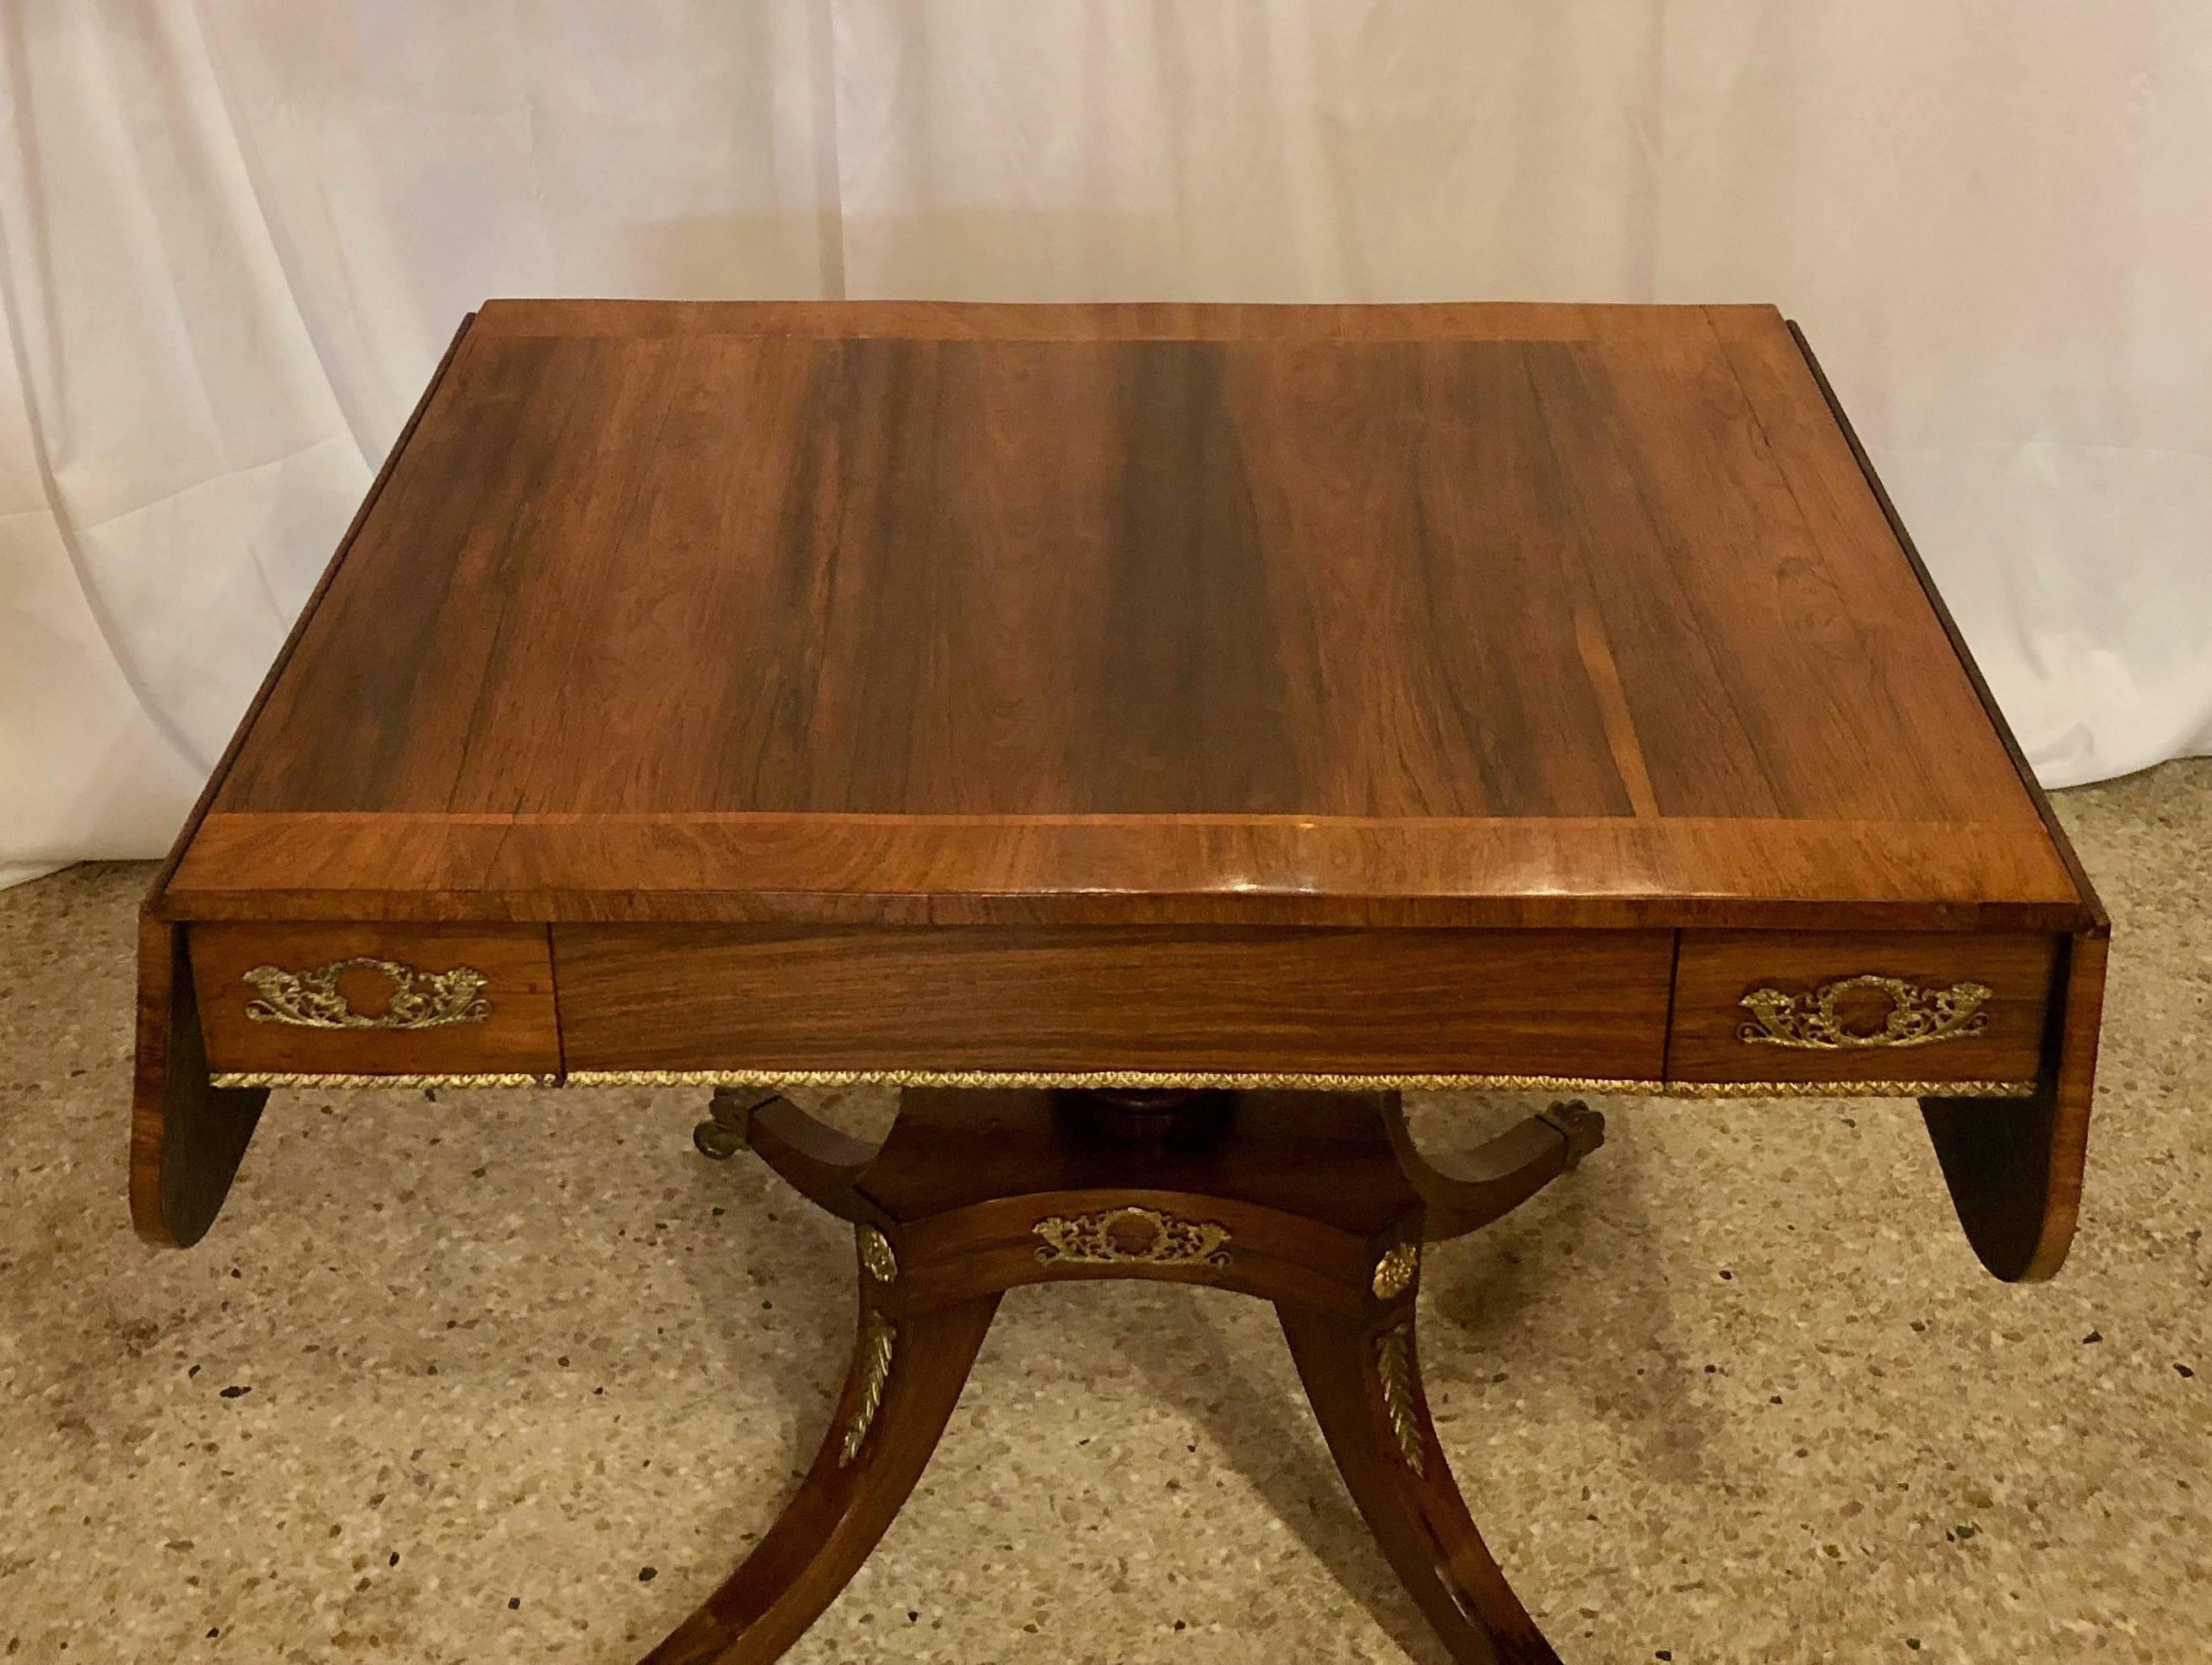 19th Century Antique Rosewood Regency Sofa Table with Satinwood Trim For Sale